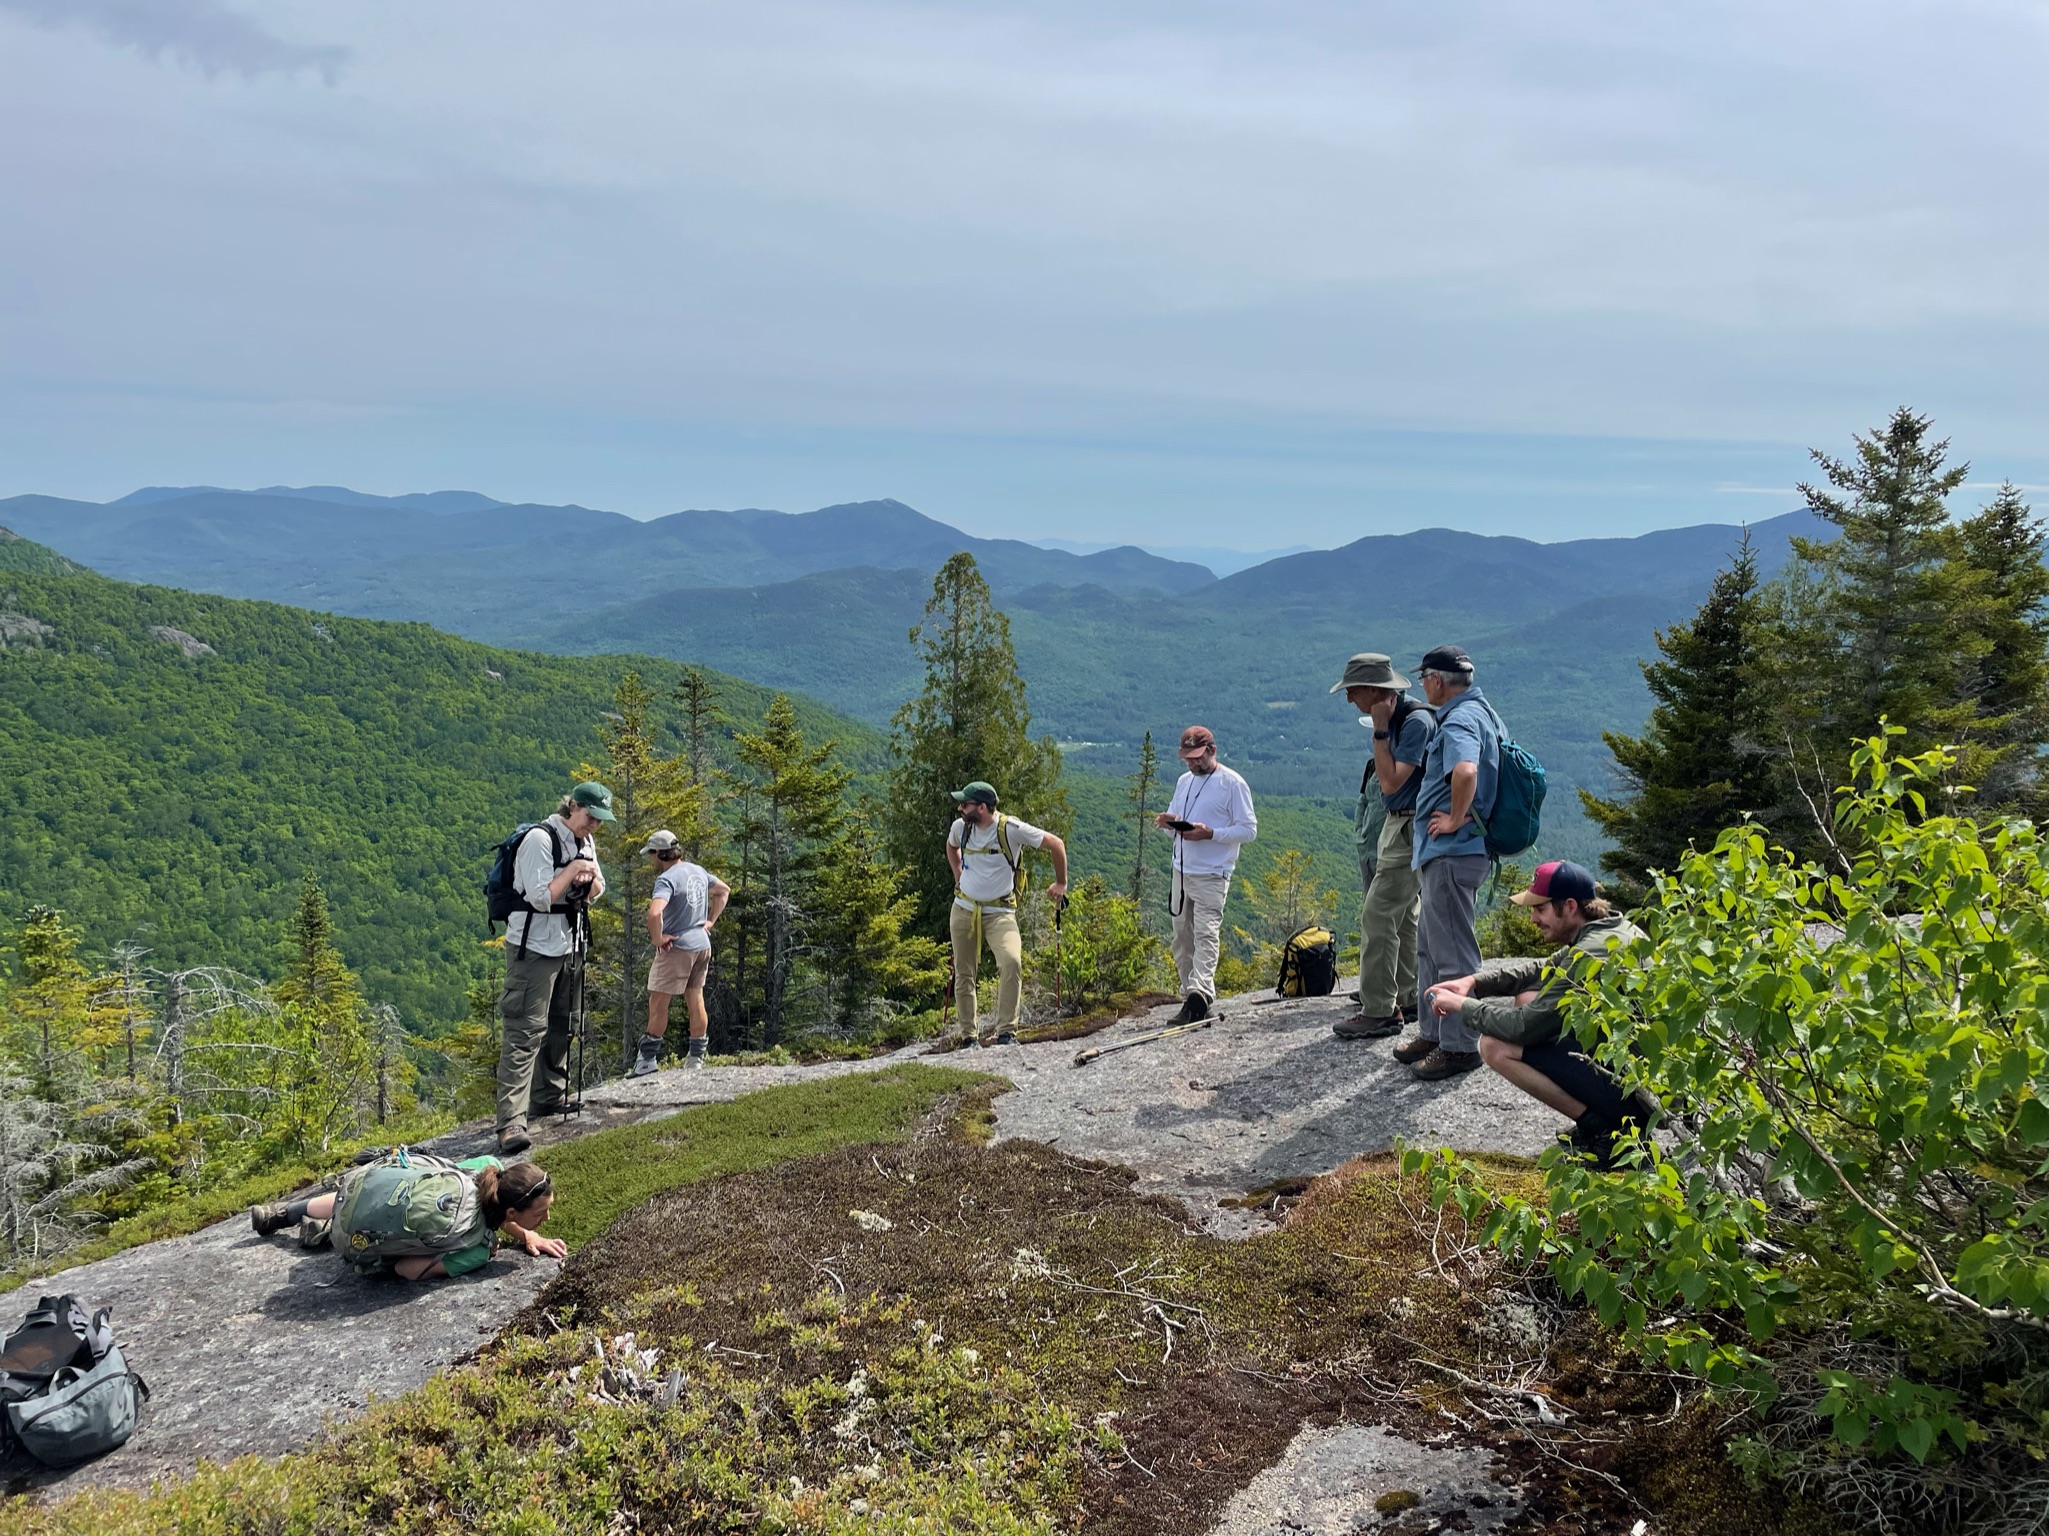 A group of scientists stand on a rocky outcropping nestled in the mountains.